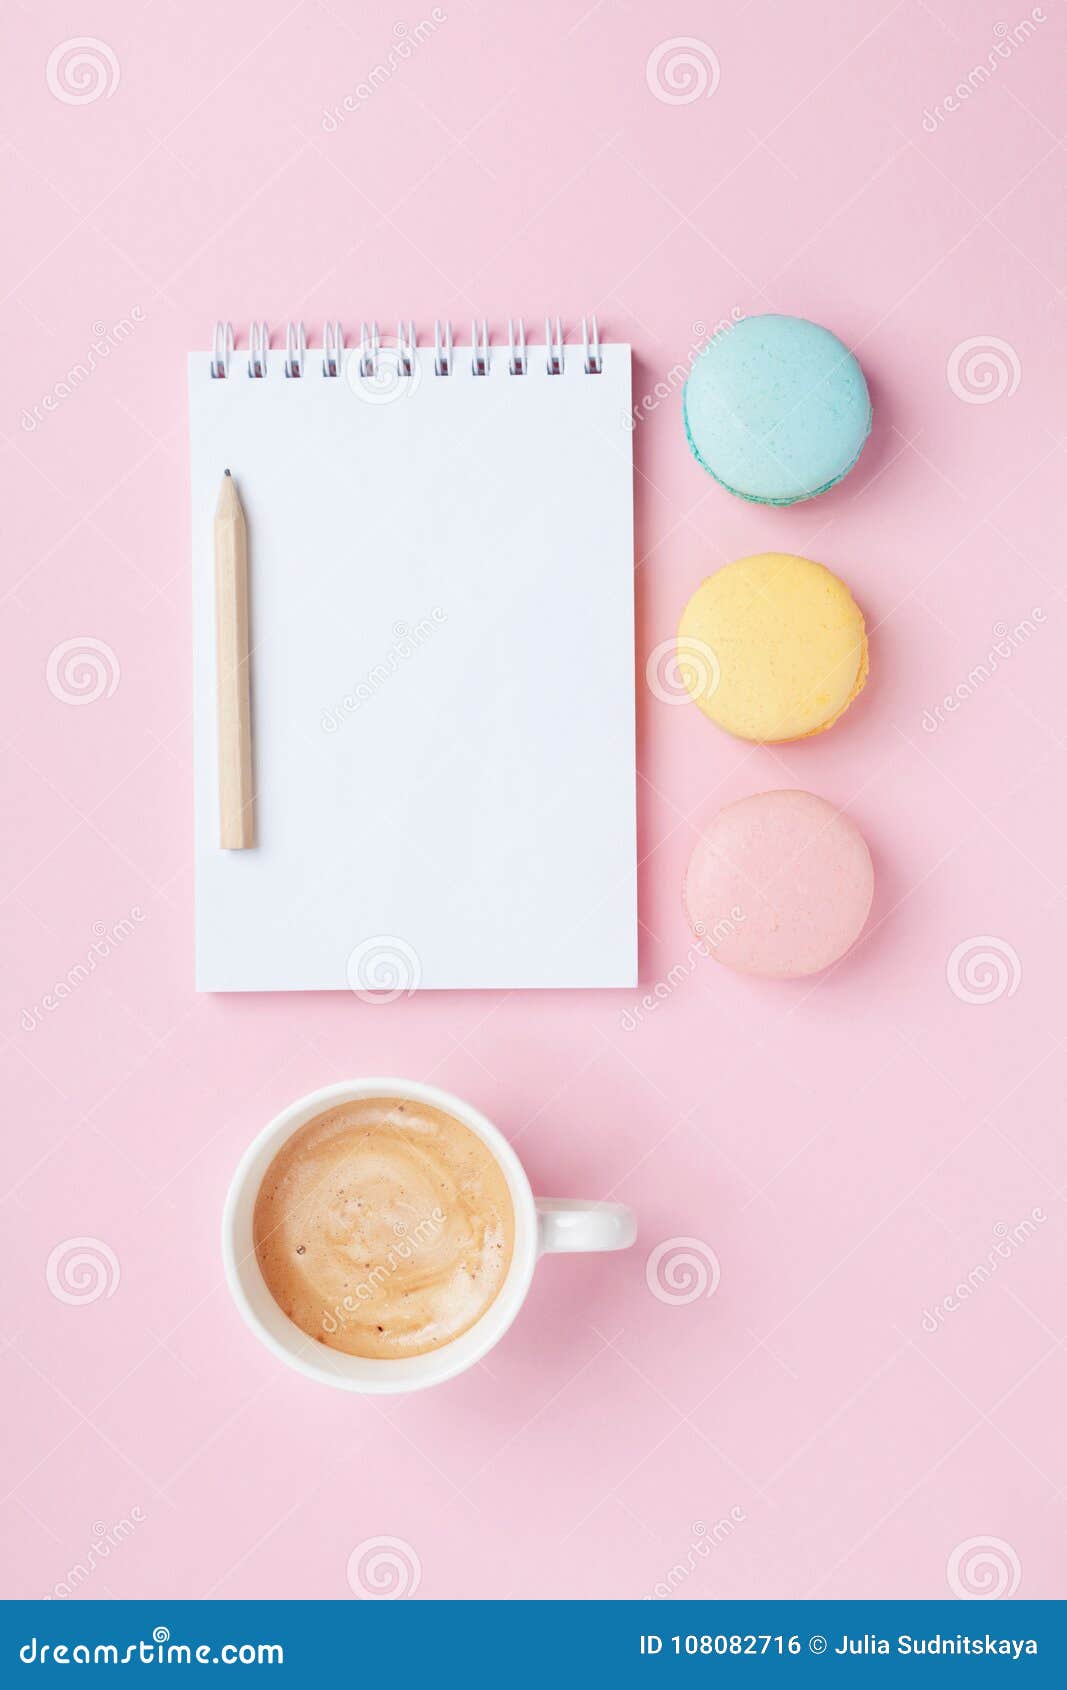 https://thumbs.dreamstime.com/z/empty-notepad-coffee-colorful-macaron-pink-pastel-desk-top-view-cozy-morning-breakfast-fashion-flat-lay-style-empty-notepad-108082716.jpg